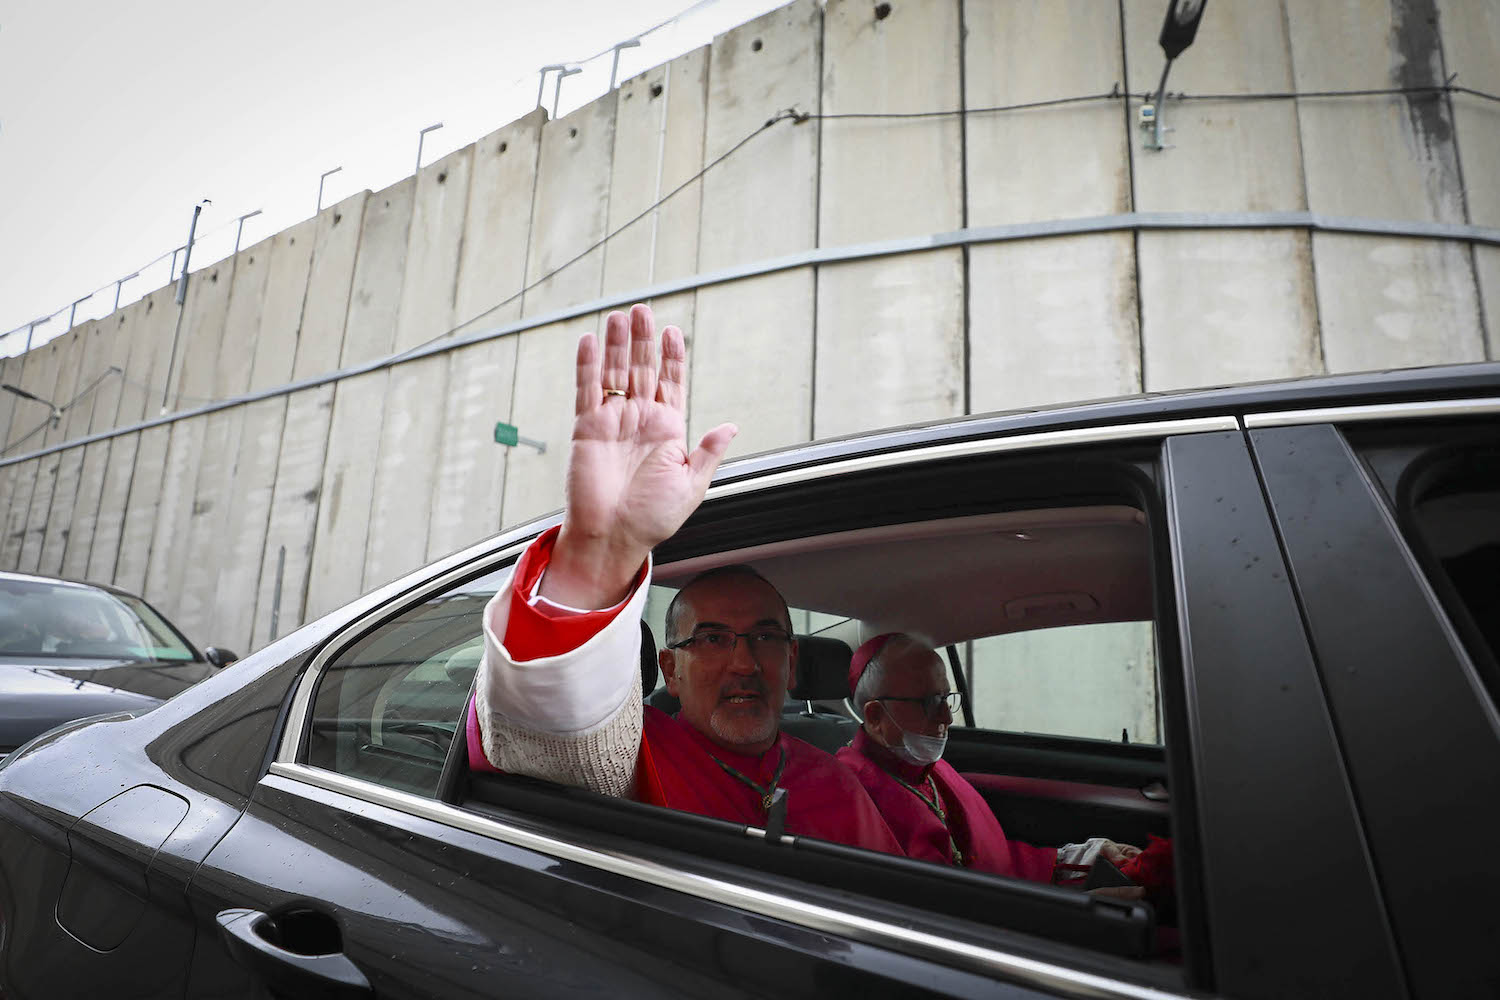 Latin Patriarch Pierbattista Pizzaballa (left) the top Catholic clergyman in Palestine, arrives at the Church of the Nativity ahead of the midnight Christmas Mass, Bethlehem, West Bank, December 24, 2021. (STR/Flash90)